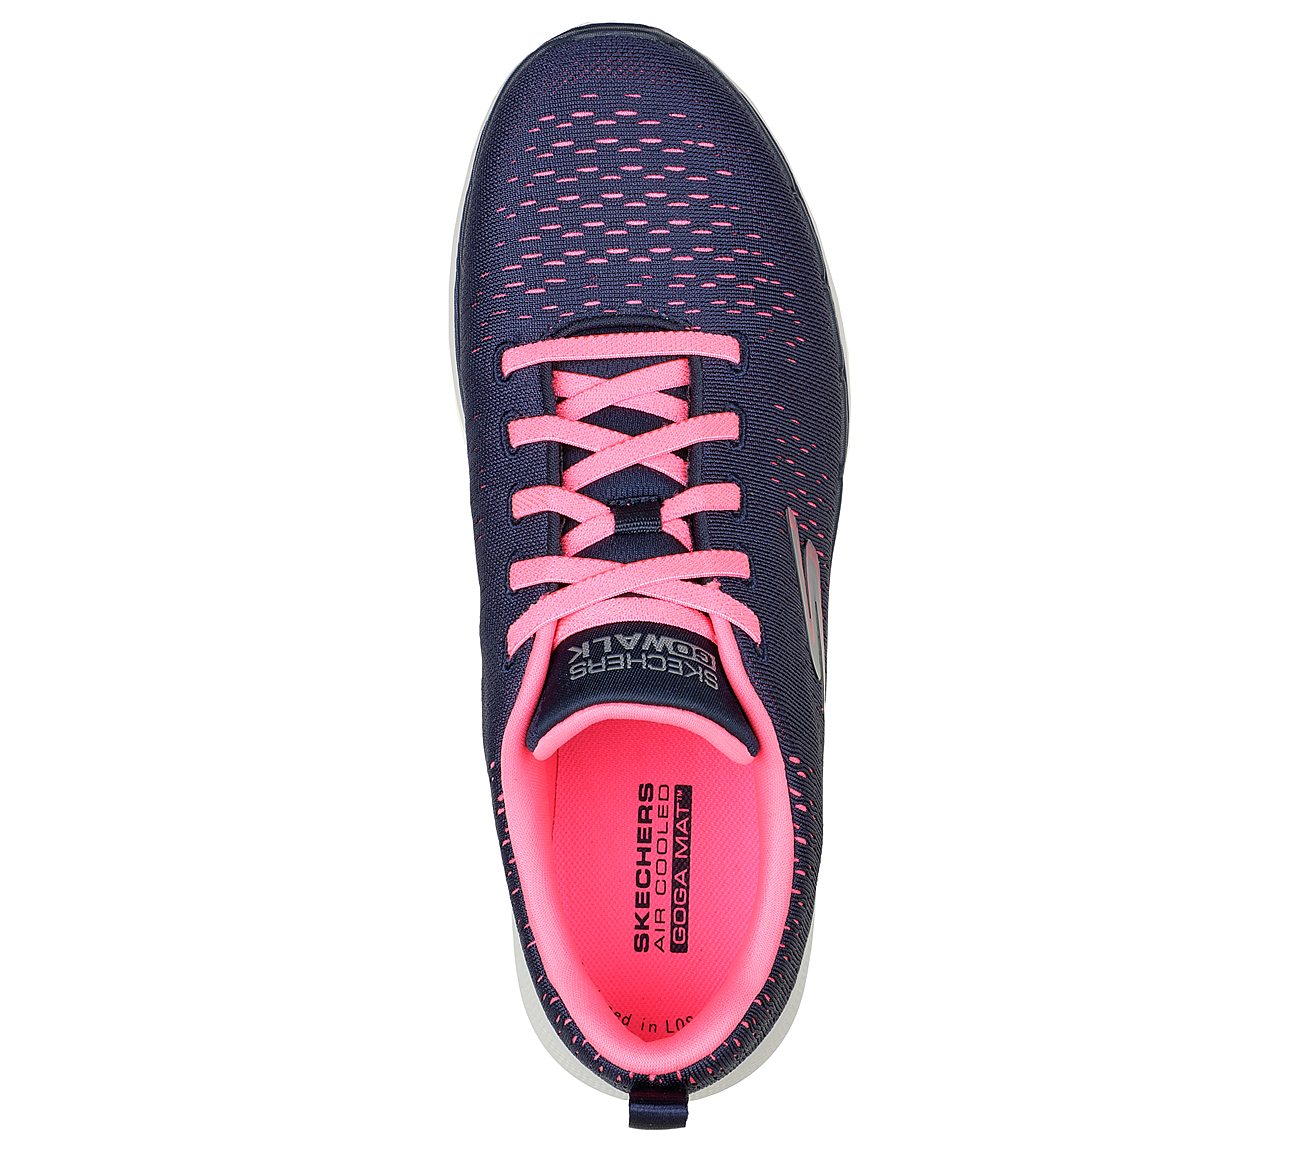 Skechers Navy/Hot Pink Go Walk 6 Adora Womens Lace Up Shoes - Style ID ...